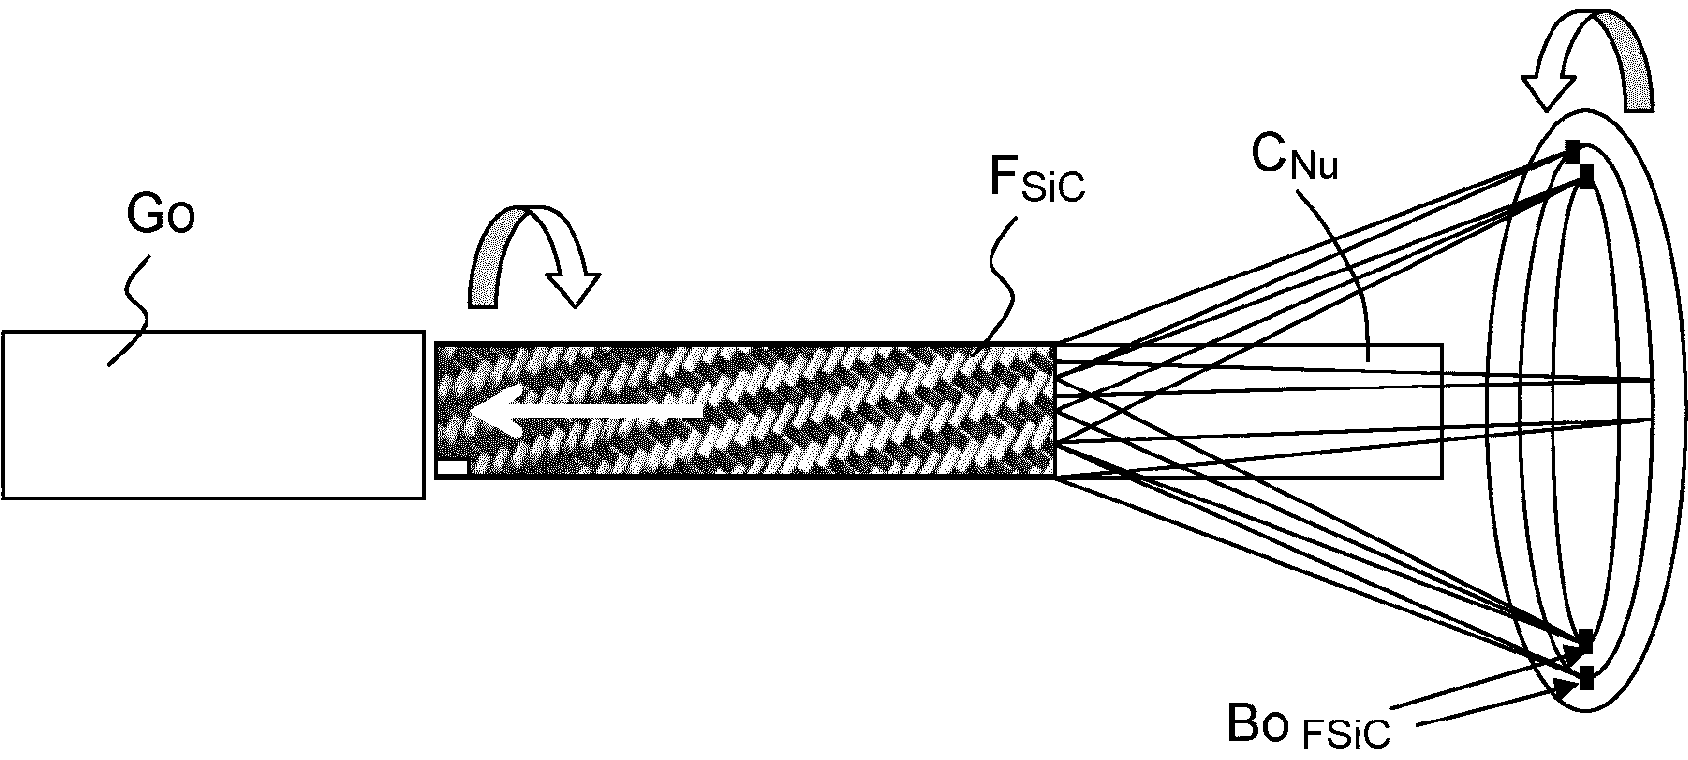 Metal nuclear-fuel pin including a shell having threads or fibers made of silicon carbide (SiC)